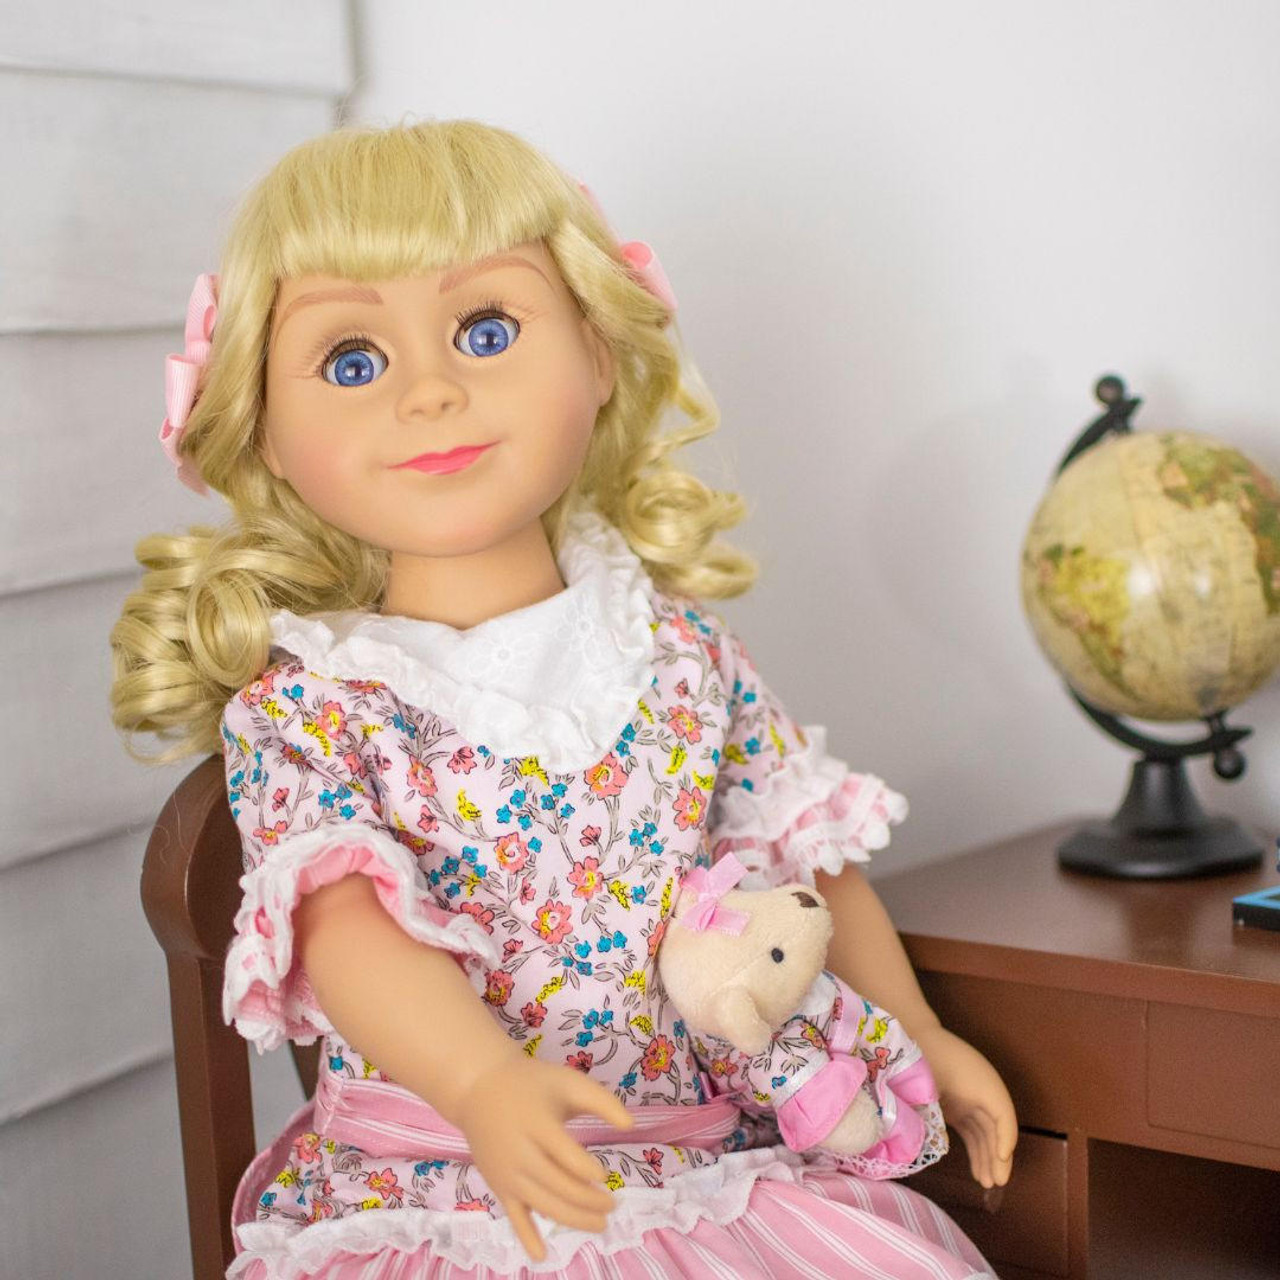 https://cdn11.bigcommerce.com/s-m5vcu70215/images/stencil/1280x1280/products/248/2872/the-queens-treasures-little-house-on-the-prairie-nellie-oleson-18-inch-doll__05013.1692302560.jpg?c=1